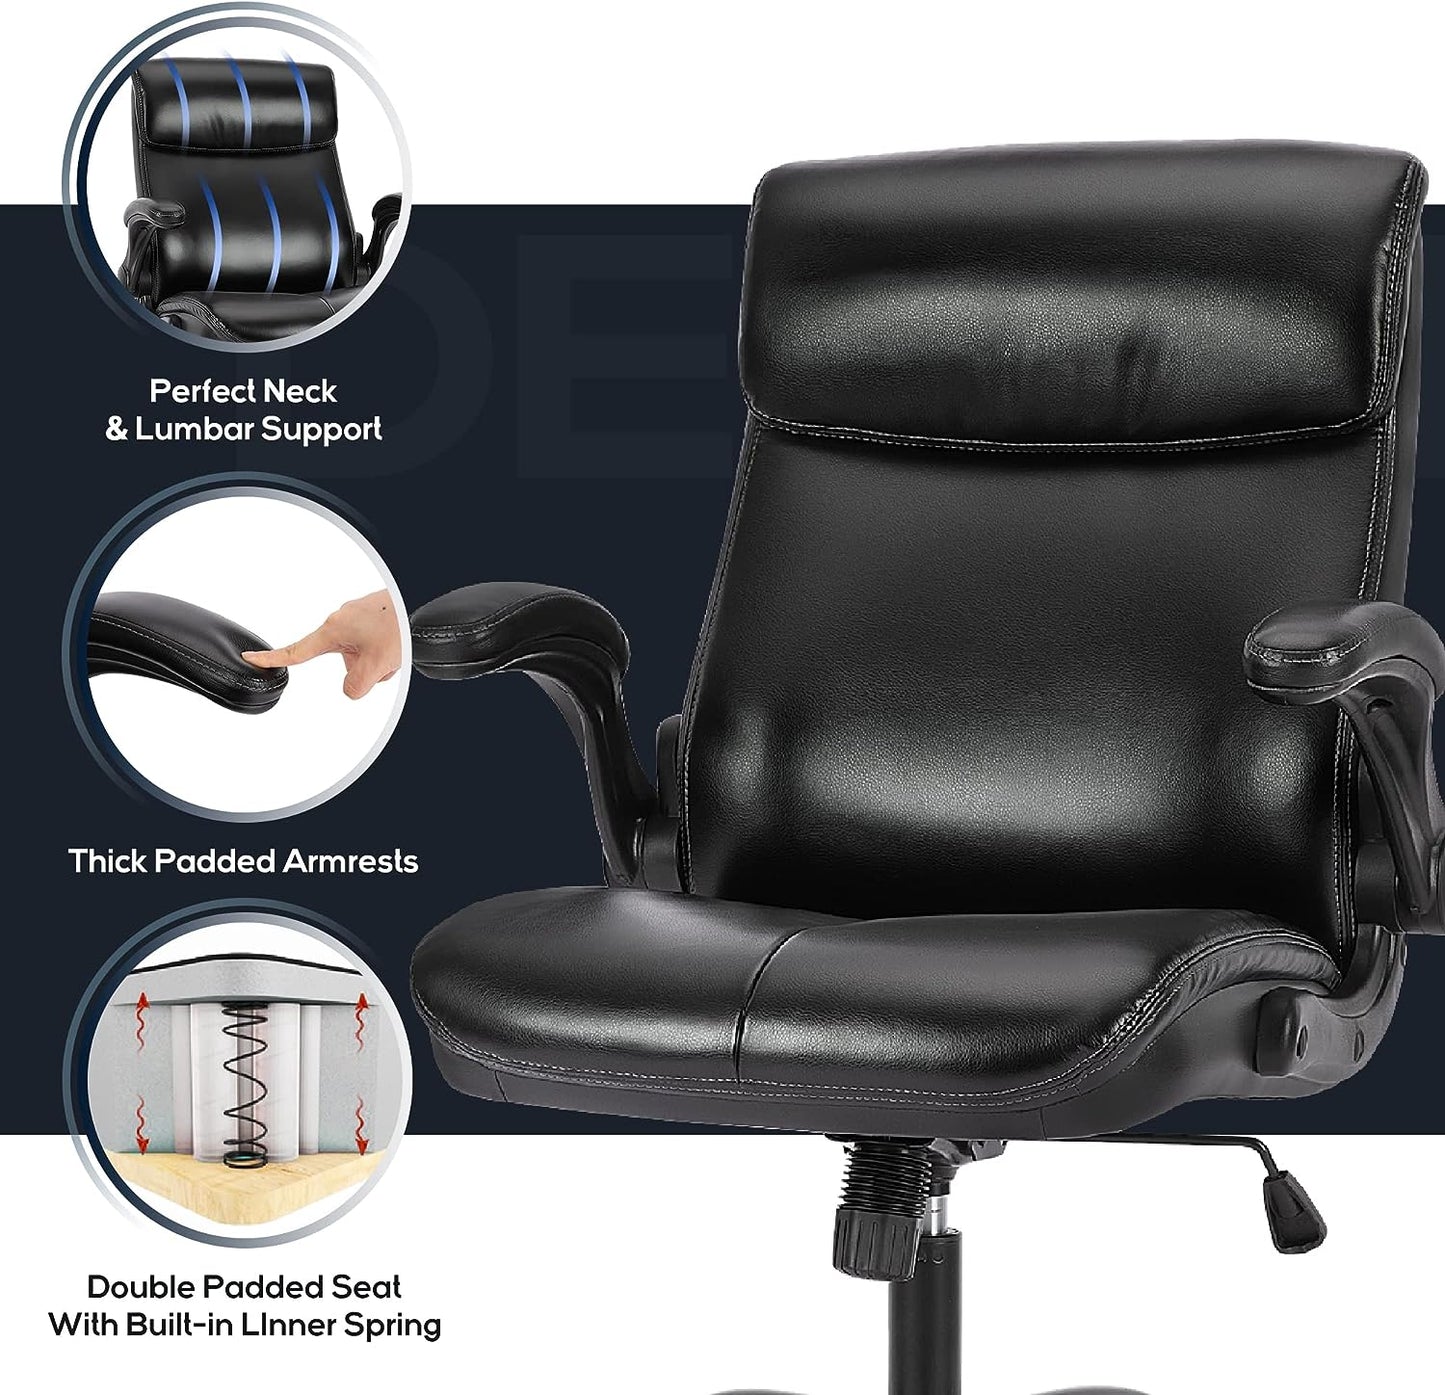 Office Chair Executive Computer Chair-Ergonomic Home Office Chair with Padded Flip-up Arms, Adjustable Height and Tilt Lock, Swivel Rolling Task Chair with Thick Leather for Comfort, Black